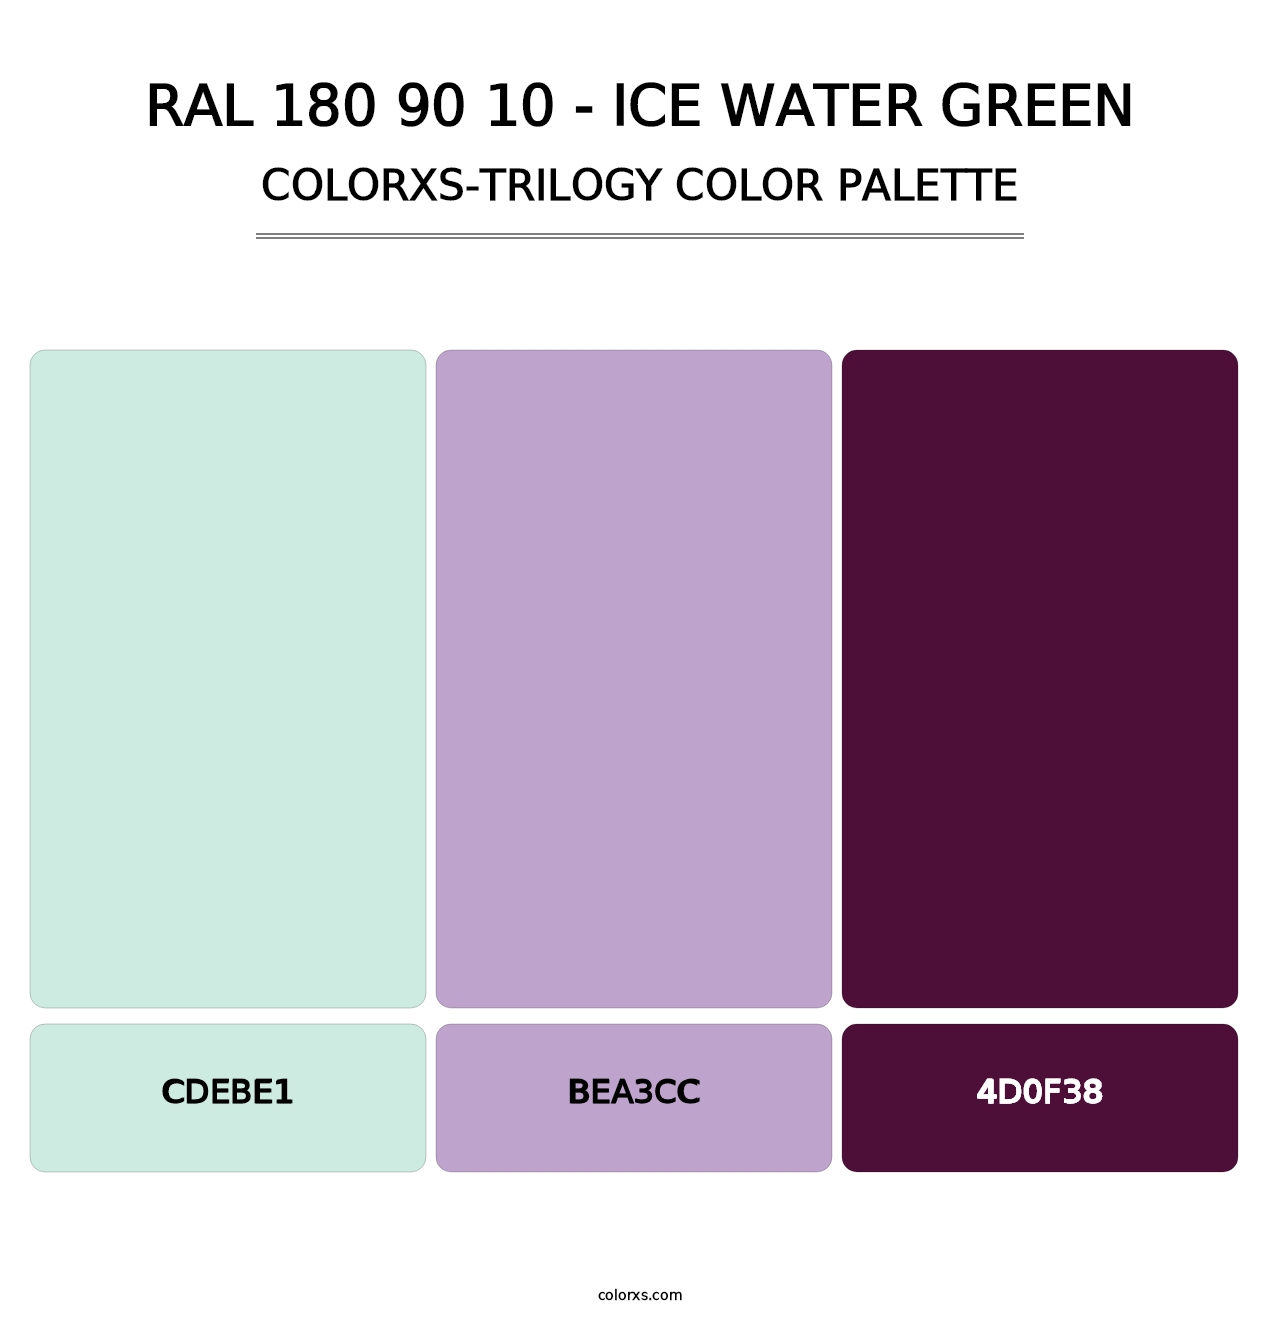 RAL 180 90 10 - Ice Water Green - Colorxs Trilogy Palette